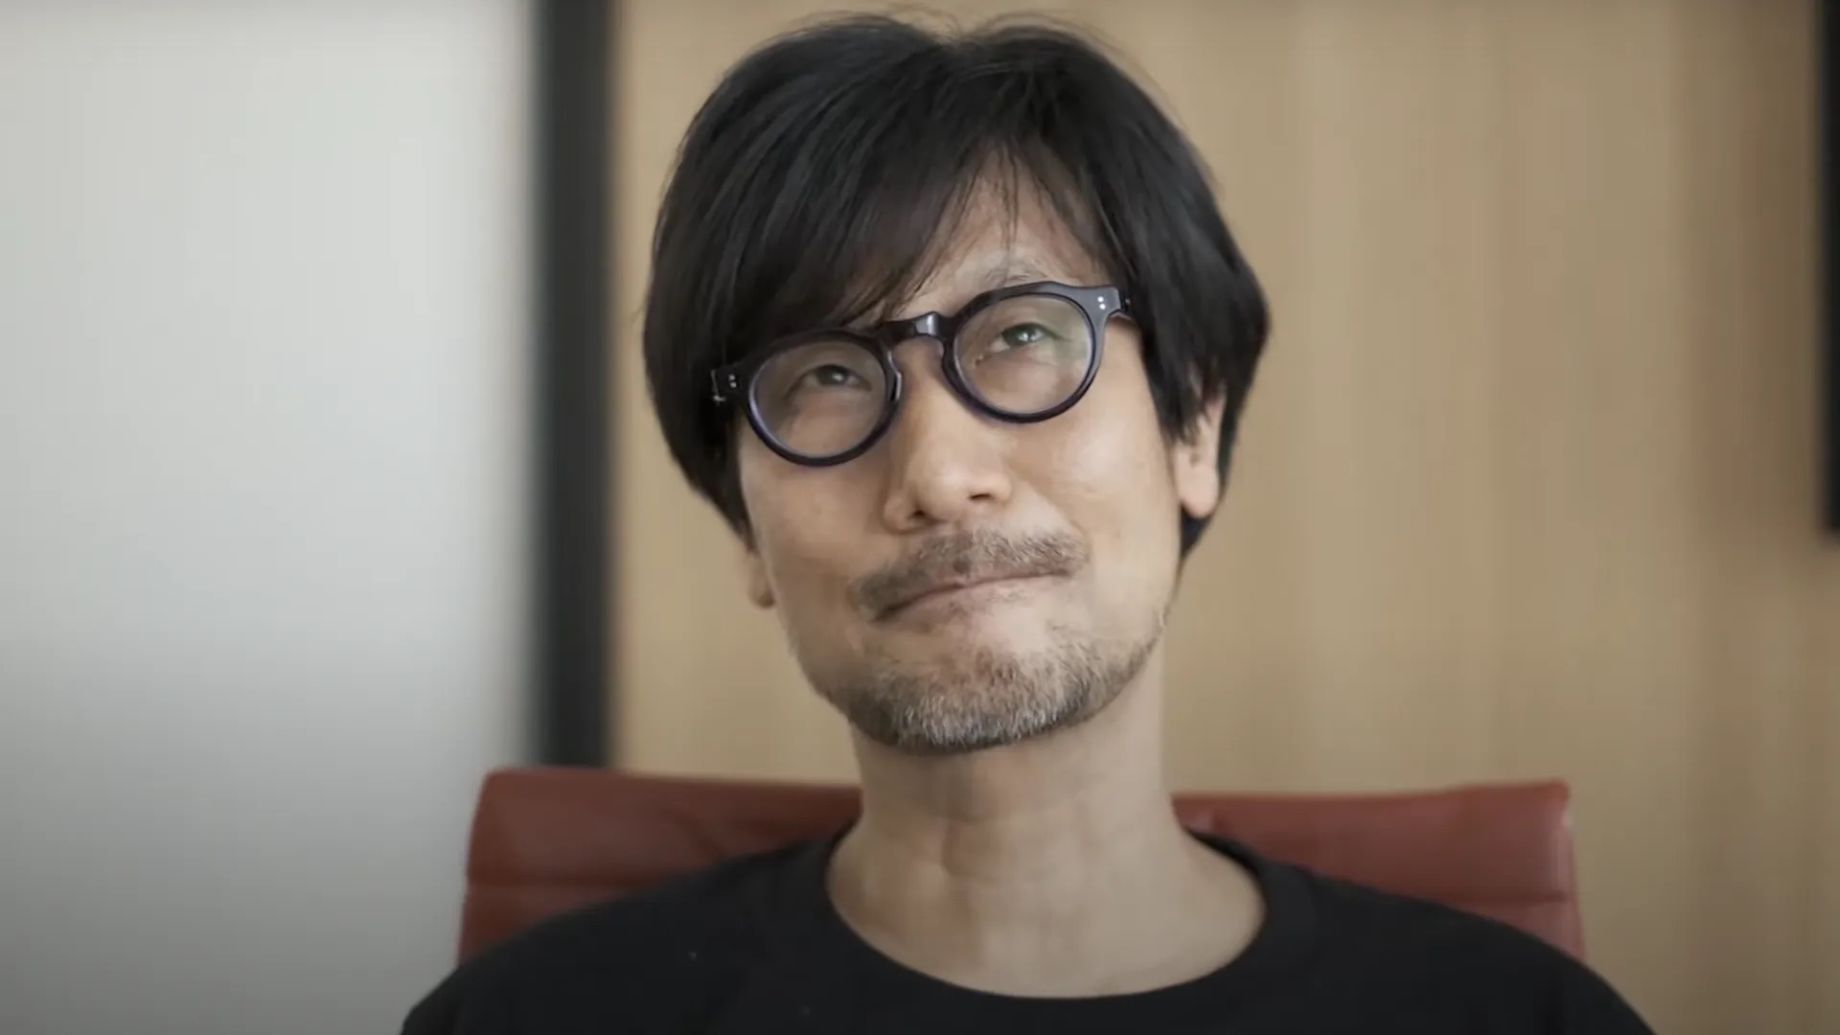 Screw dying, says Hideo Kojima, 'I'll probably become an AI and stick  around